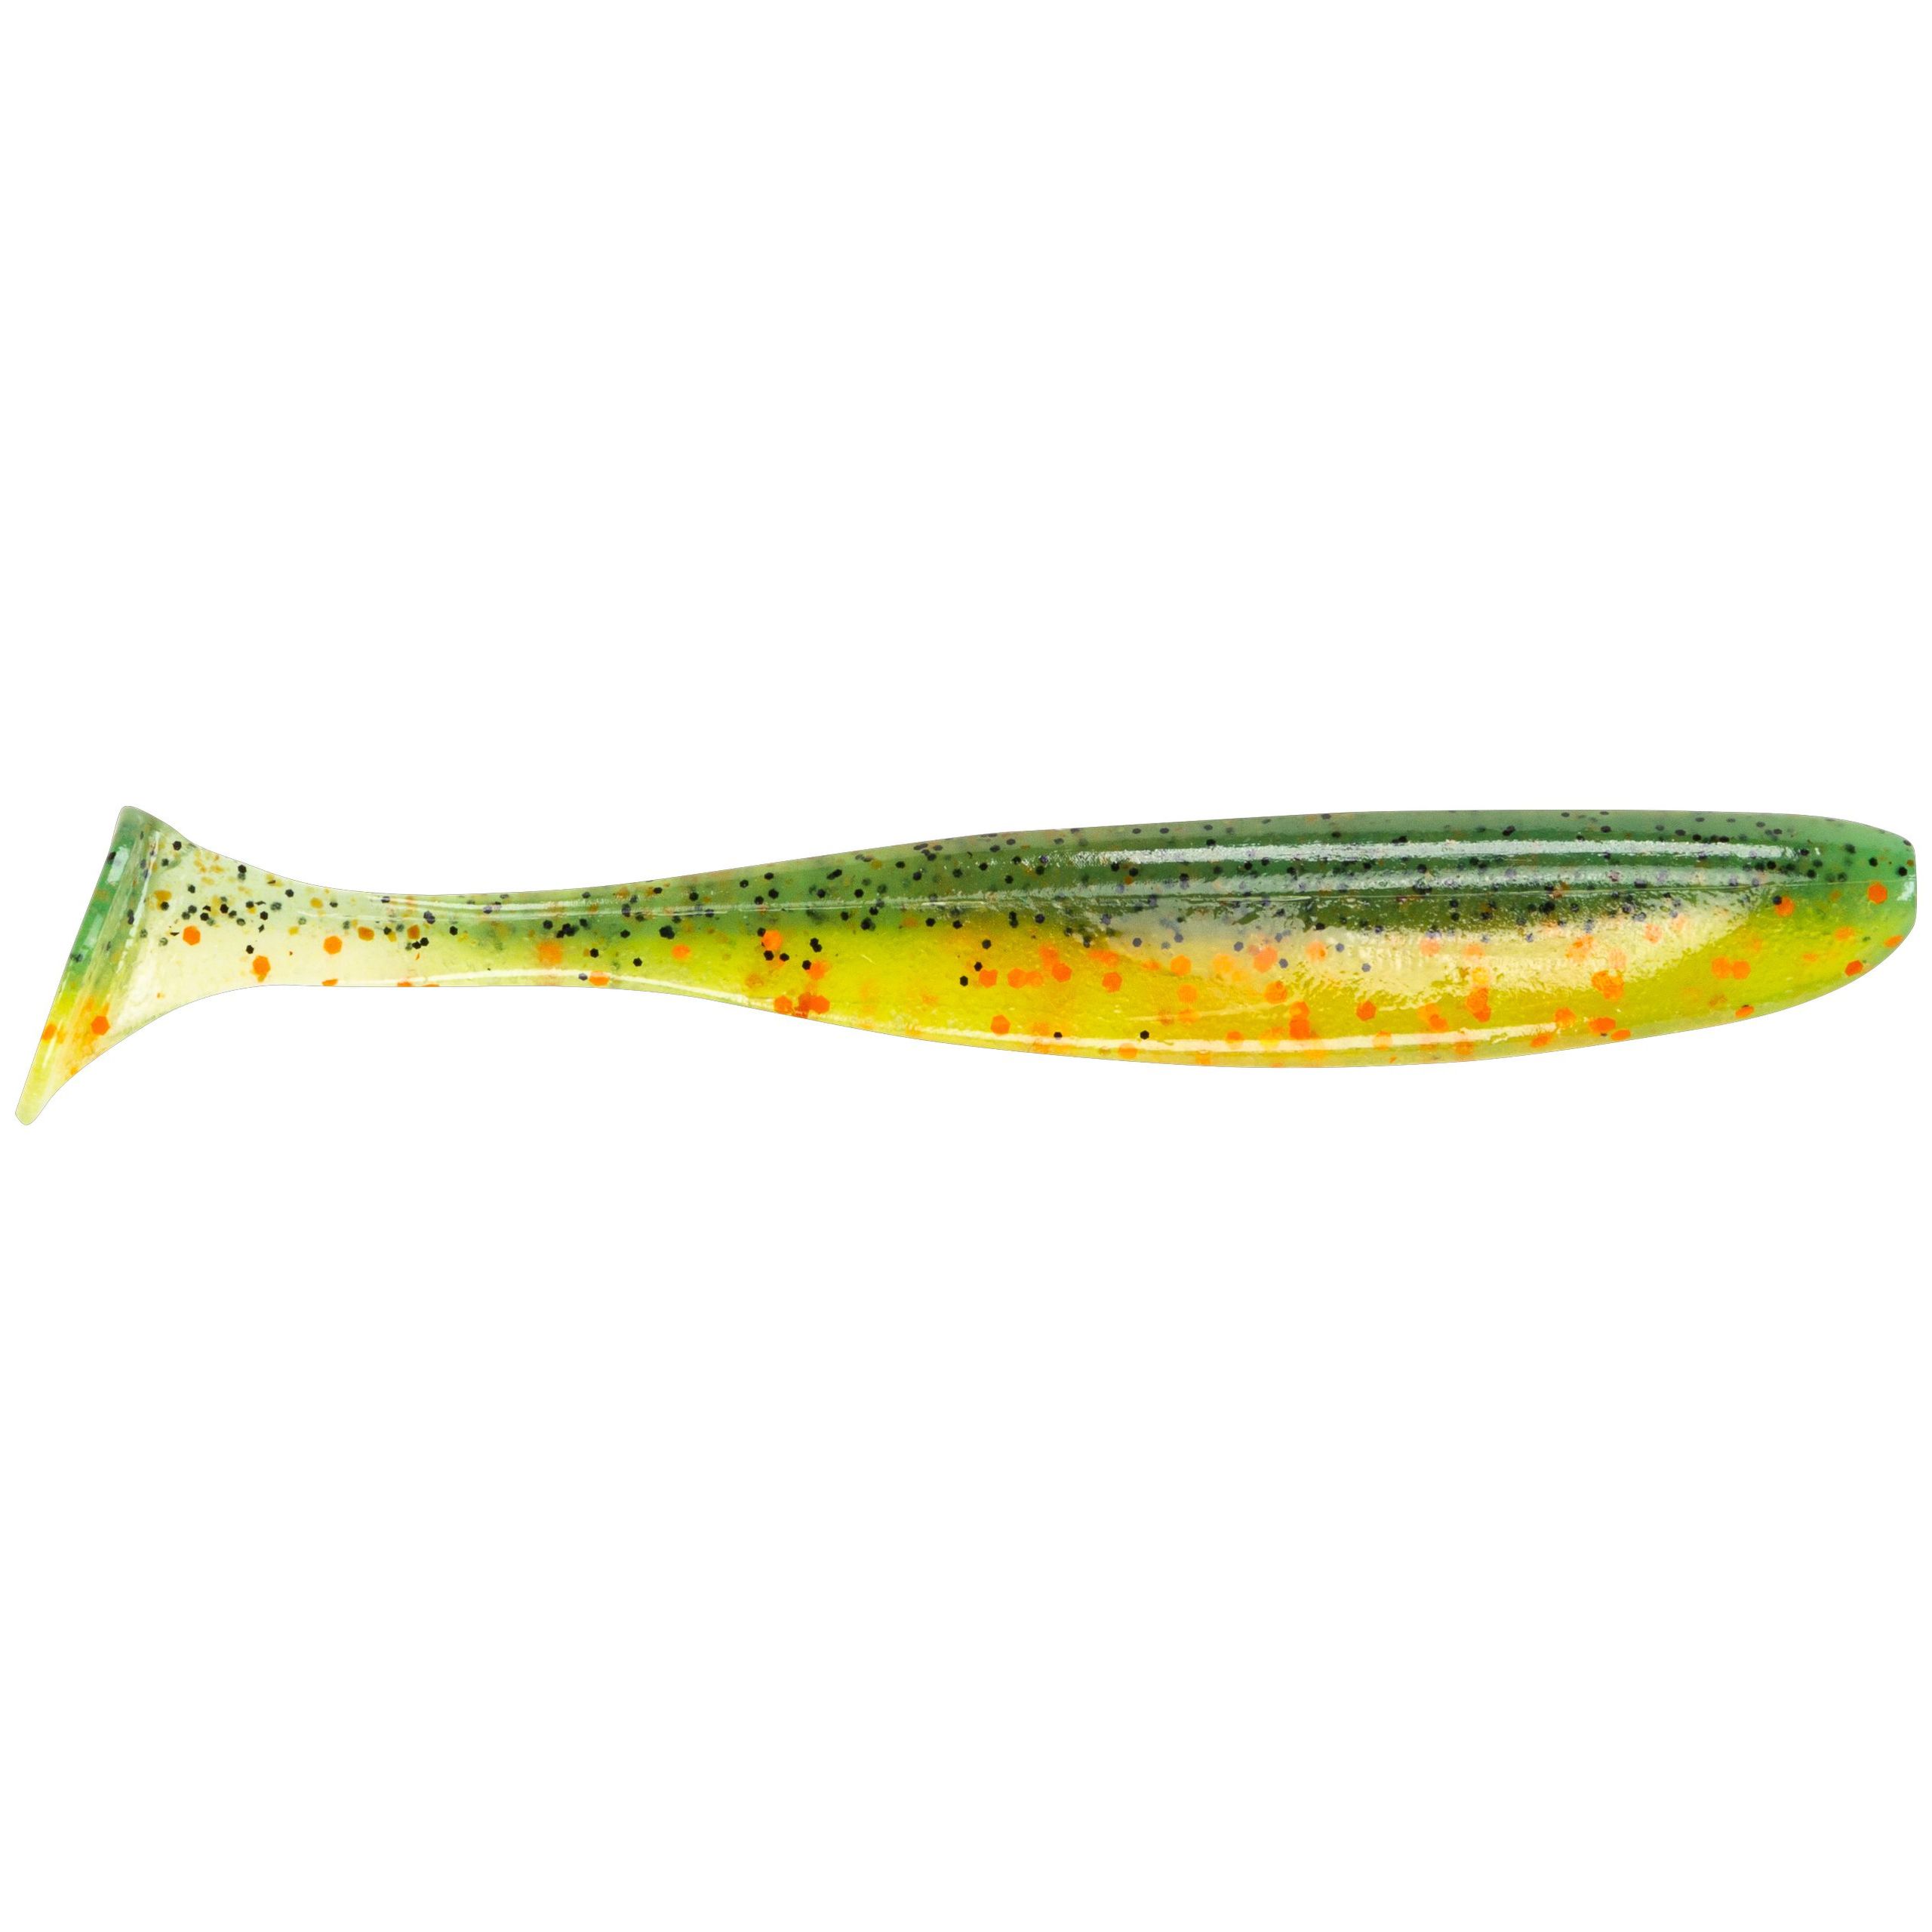 Keitech Easy Shiner 3 - Male Perch - Limited Edition